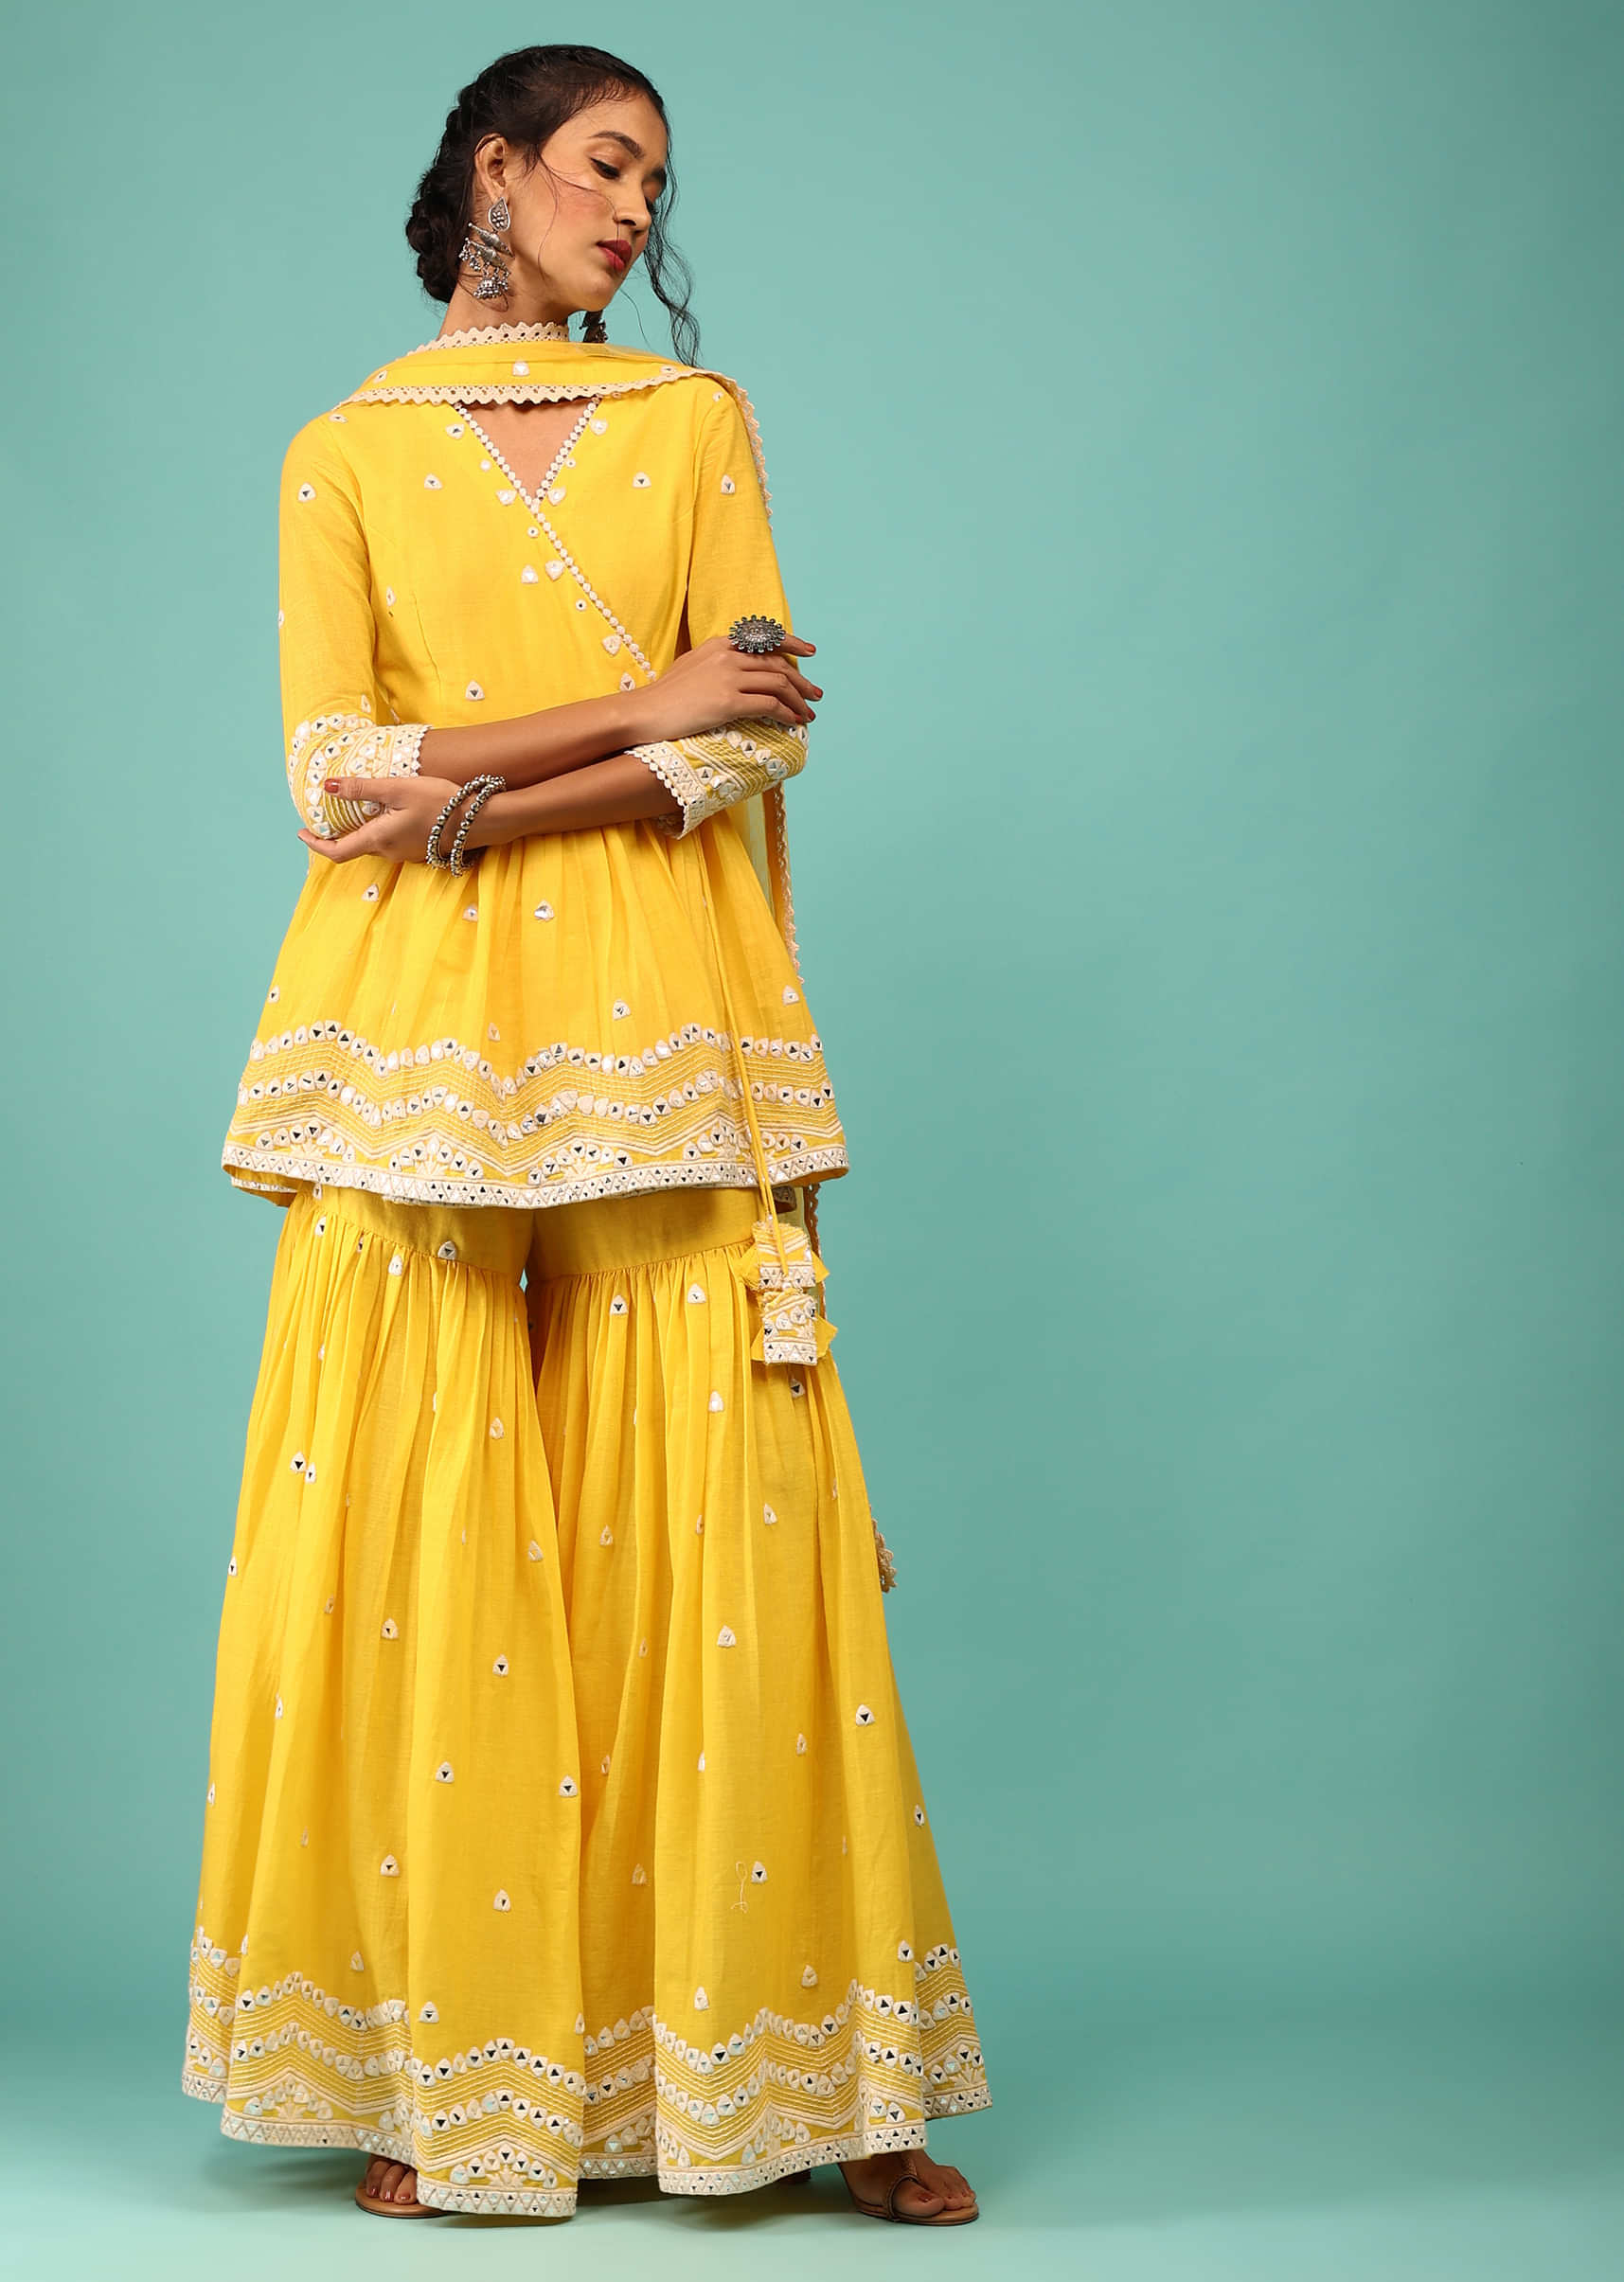 Bright Yellow Sharara Suit In Cotton With Lucknowi Geometric Embroidery & Angarakha Peplum Top